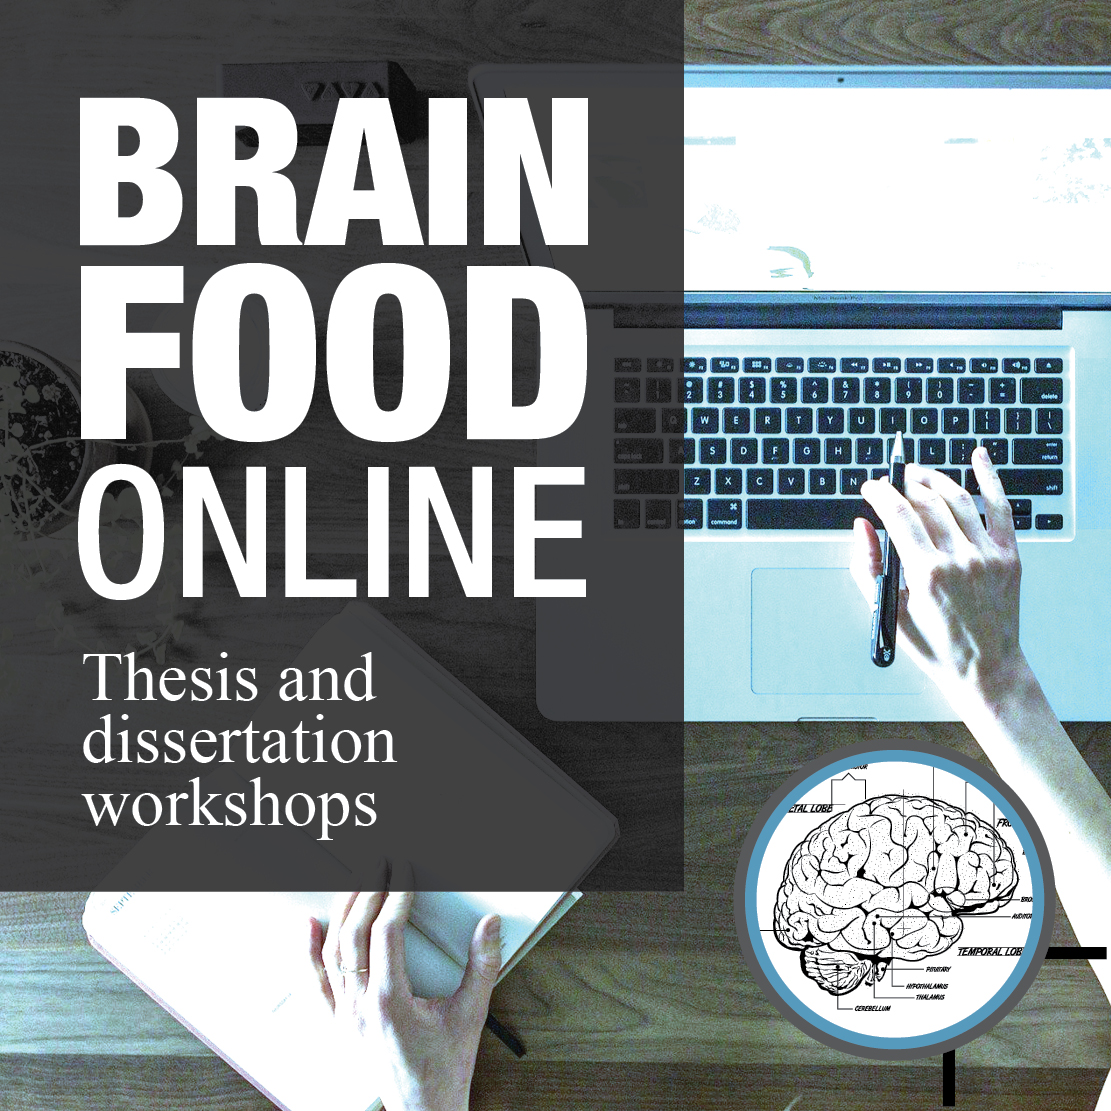 The main graphic depicts a photo of an individual working on an open laptop. One of their hands is typing on the laptop's keyboard and their other hand is resting on a book. The text on the graphic reads "BRAIN FOOD ONLINE. Thesis and dissertation workshops.” Overlaid on a part of the main graphic is another graphic depicting a brain with its different parts indicated.